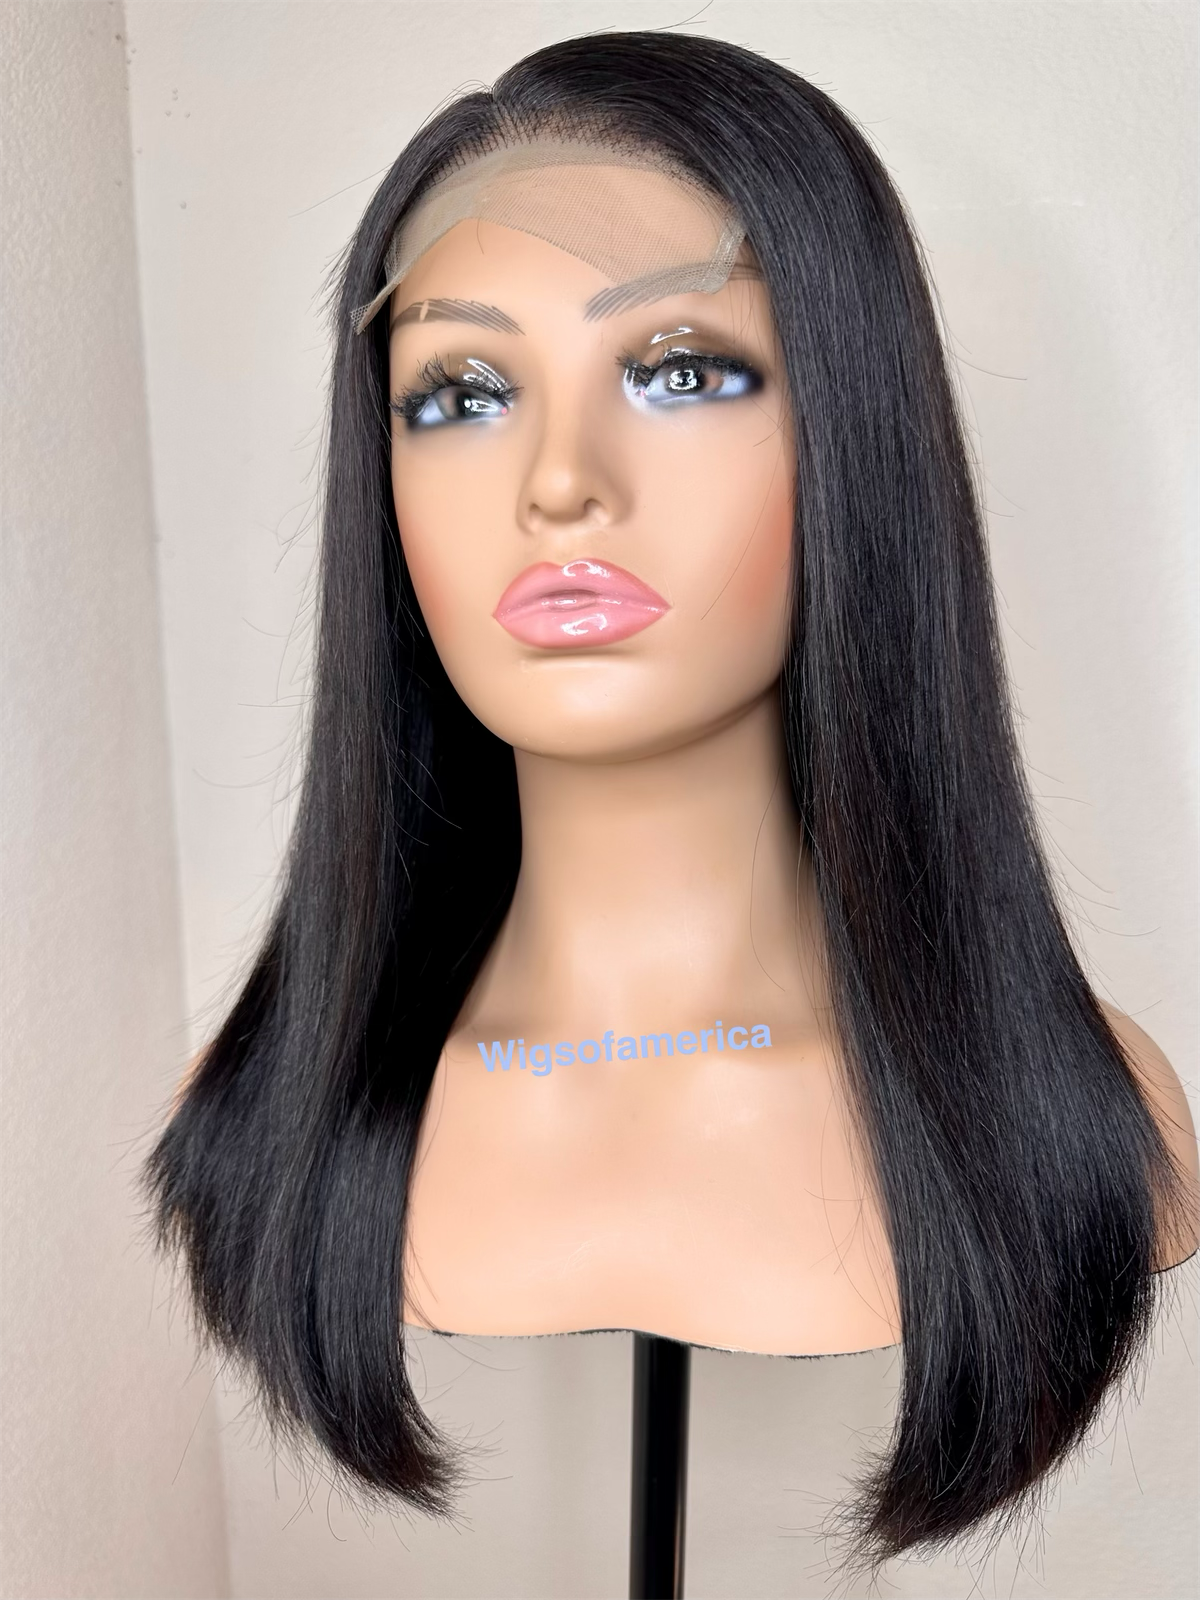 18 inch long silky way virgin human hair wig lace front side part